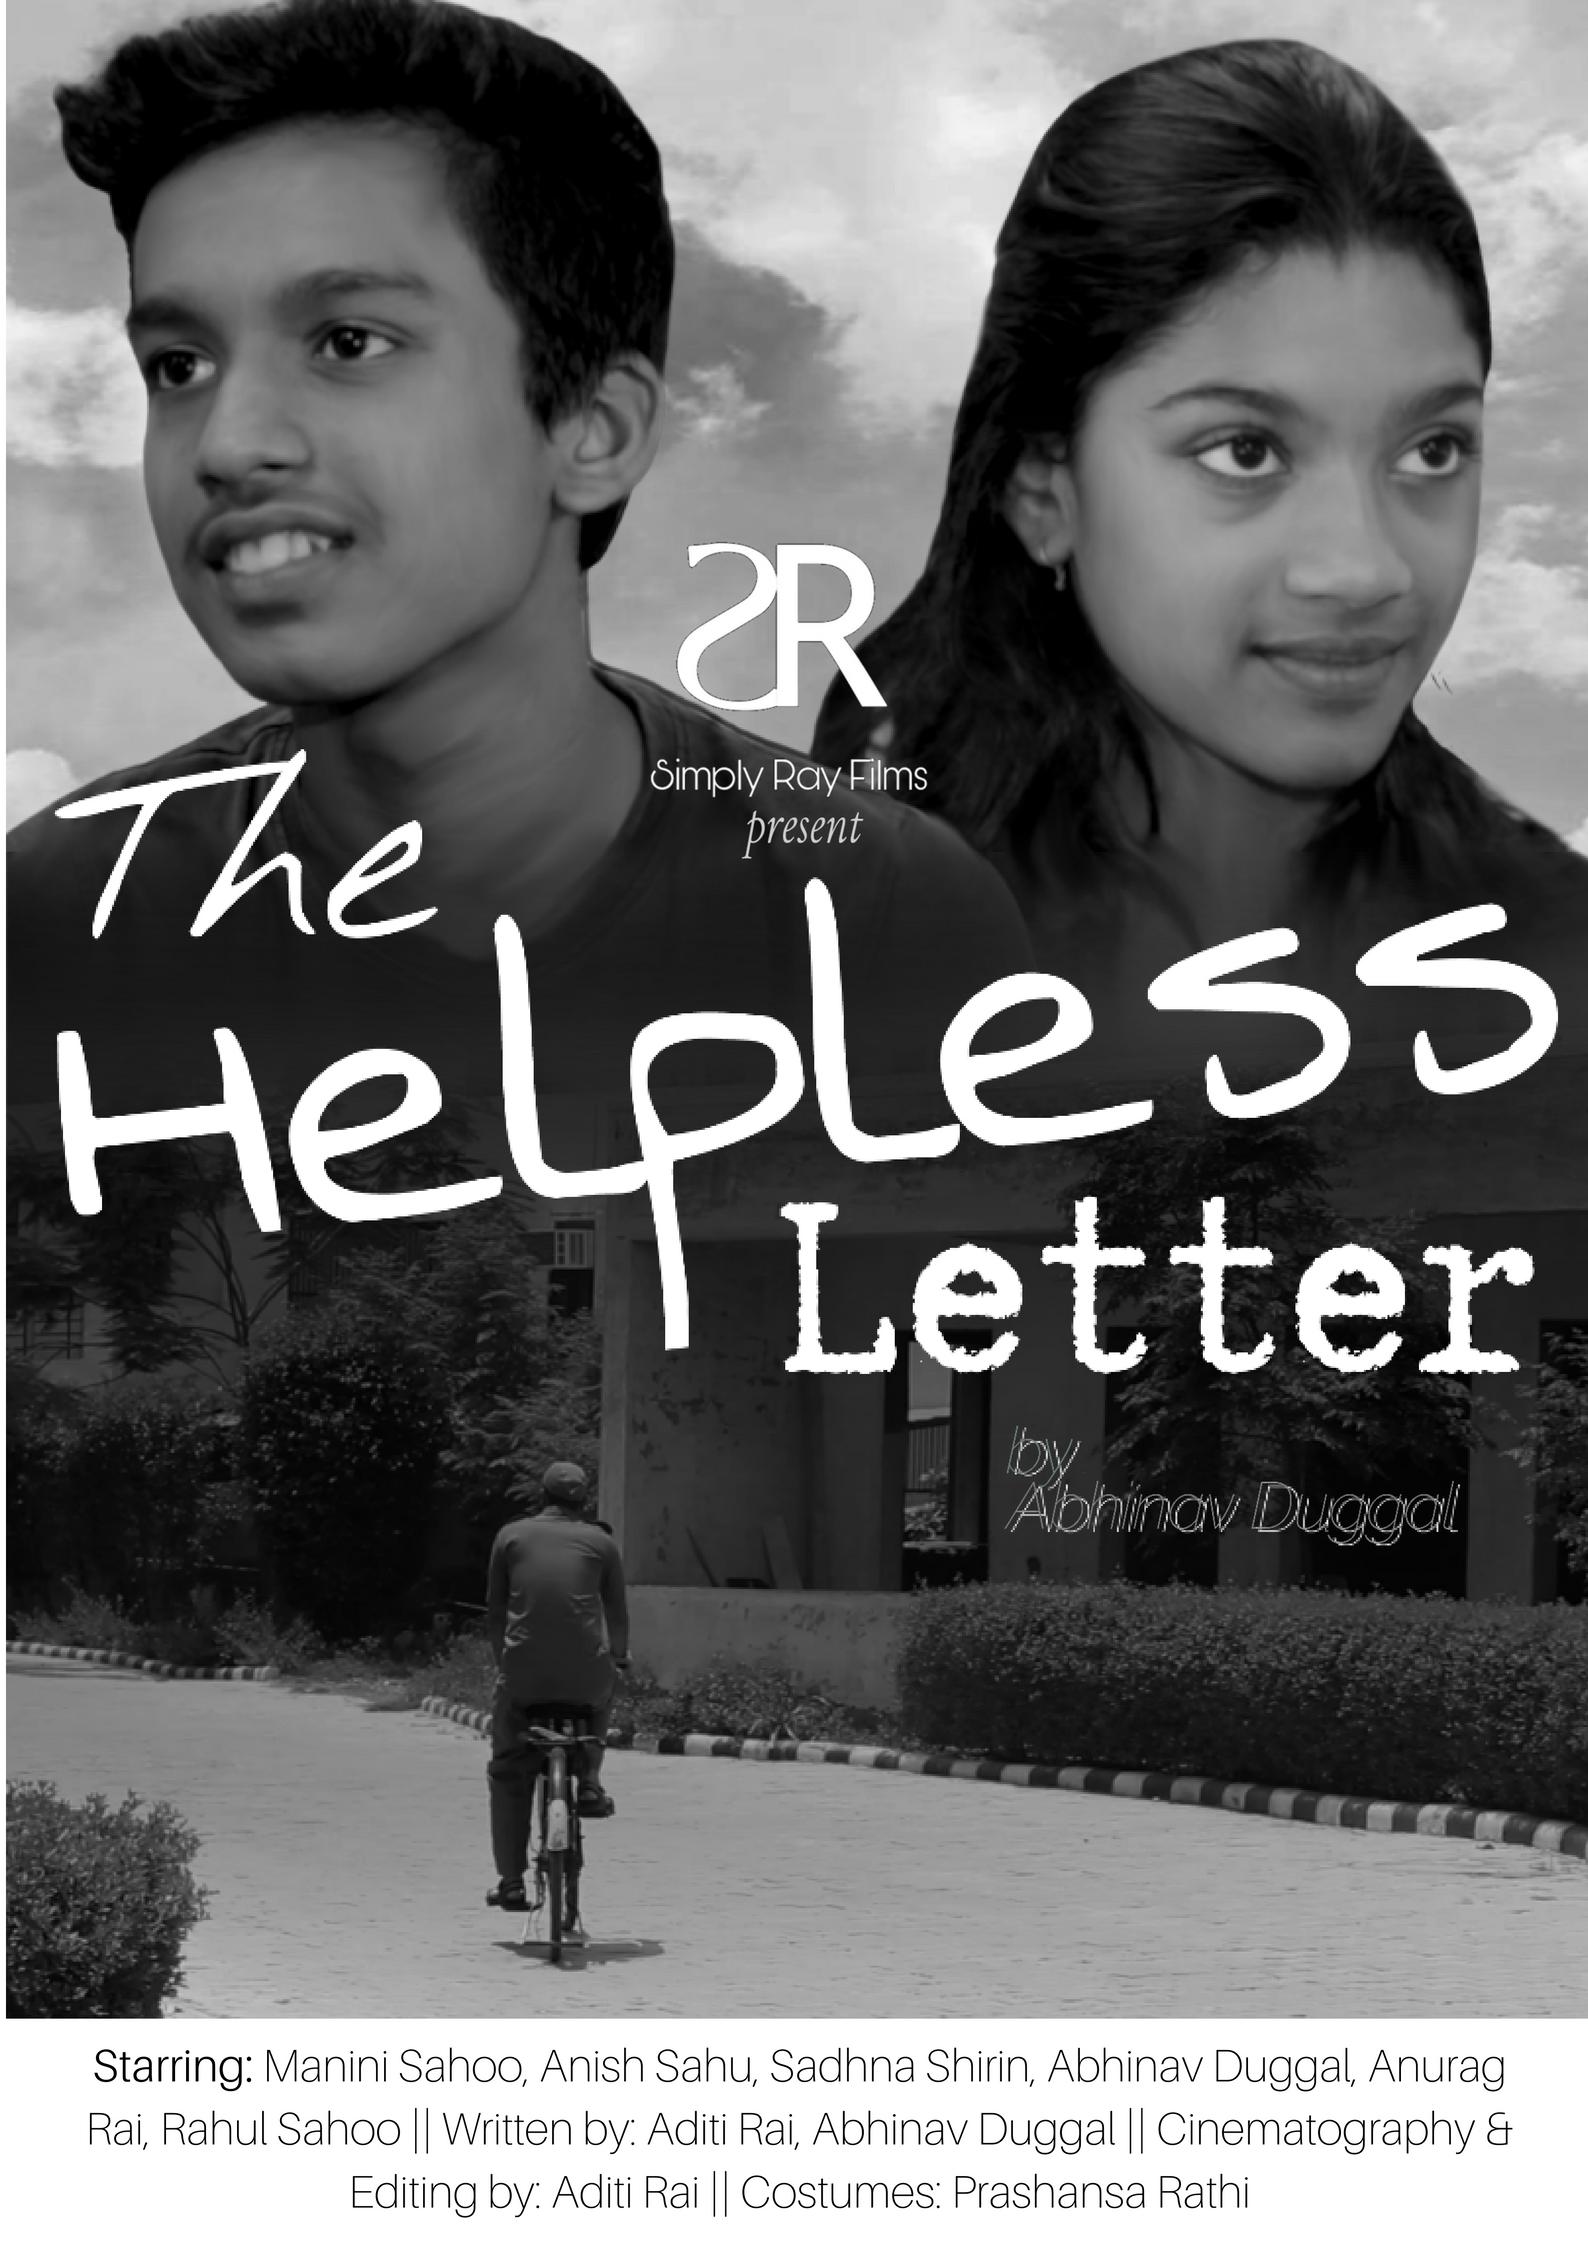 The Helpless Letter